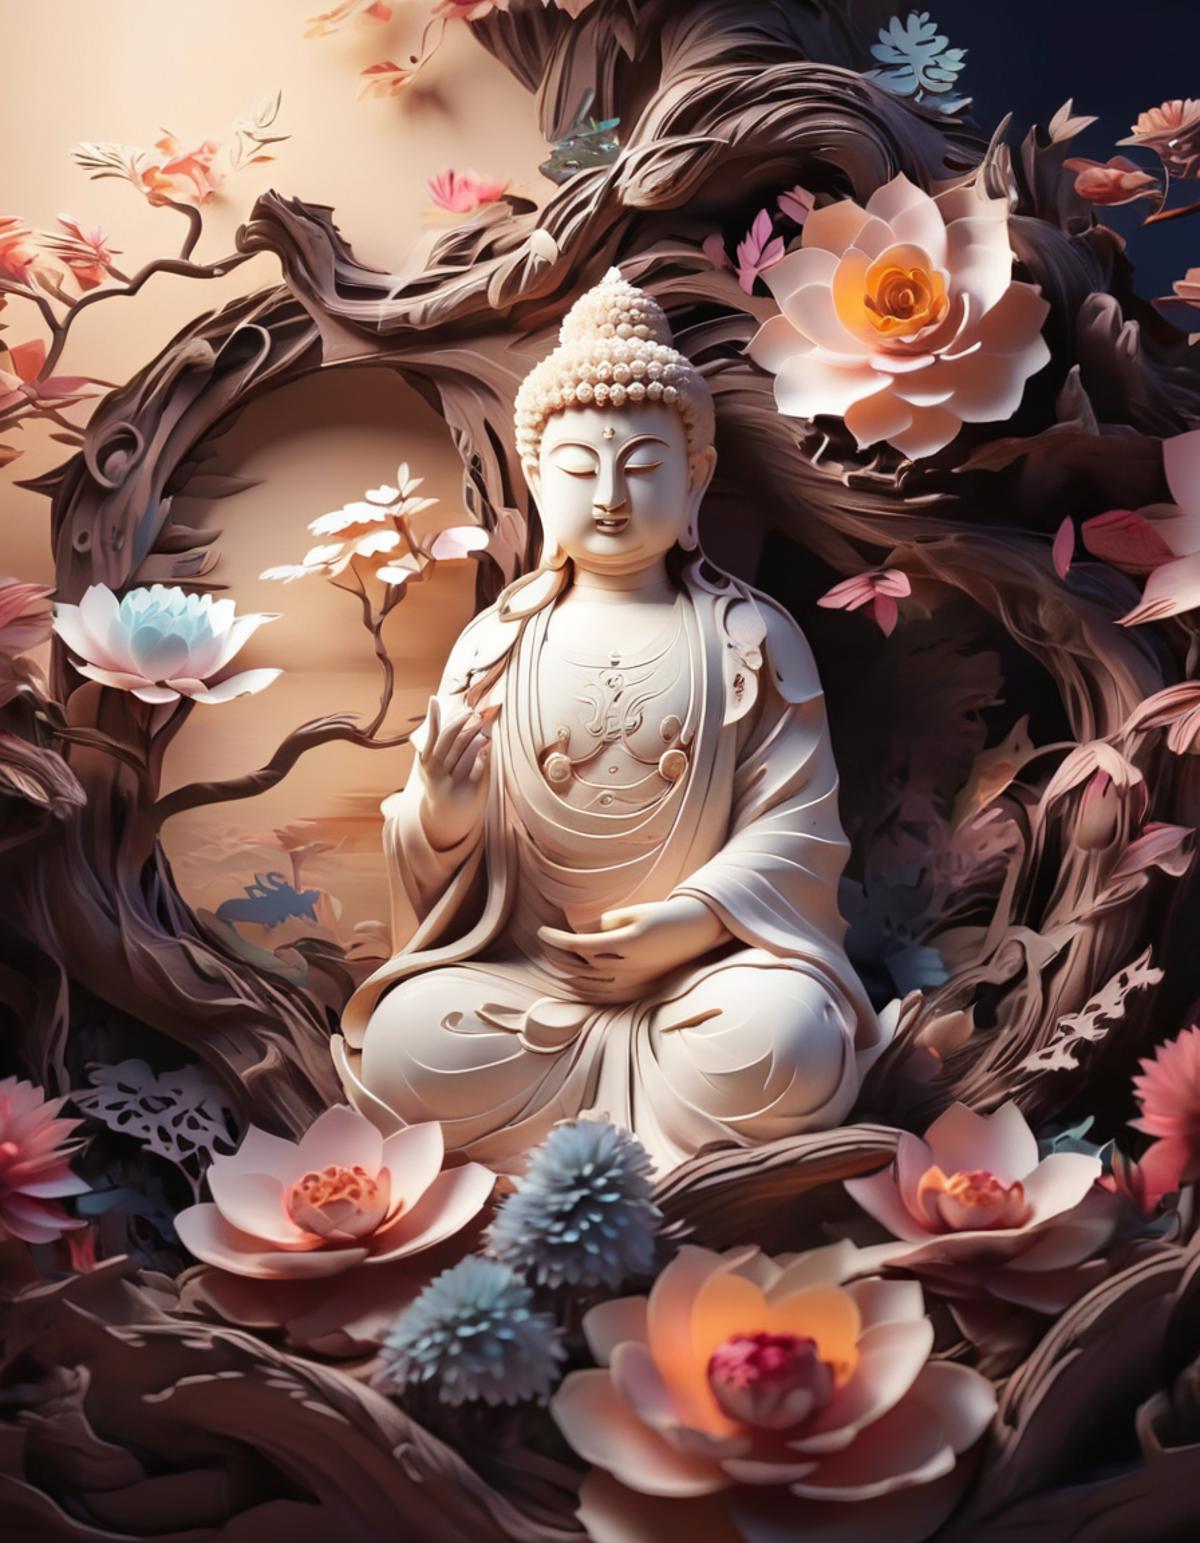 A Buddha statue sitting in a lotus flower, surrounded by flowers.